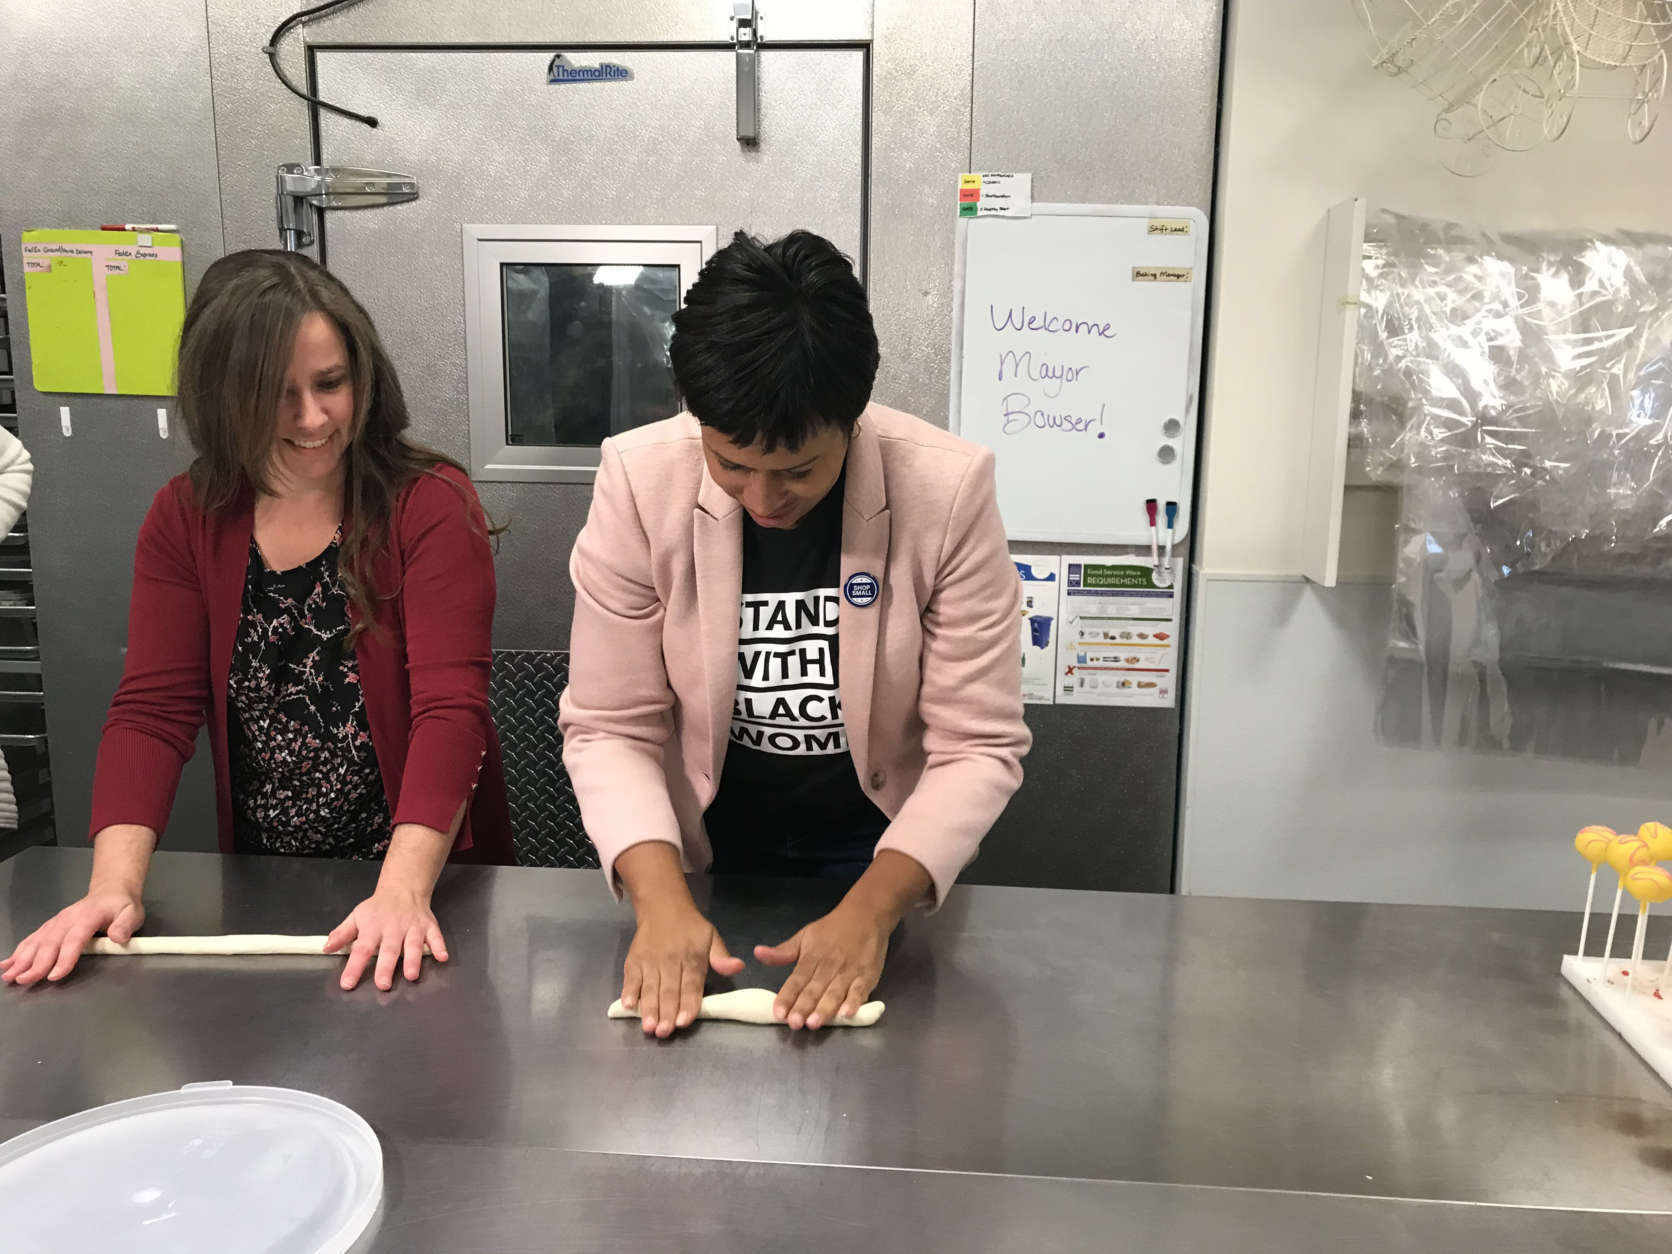 "We want to remind people all up and down Connecticut Avenue that she sells great bagels and cake pops." Mayor Bowser said after trying her hand at rolling bagels and dipping cake pops in chocolate covering. (WTOP/Dick Uliano) 
